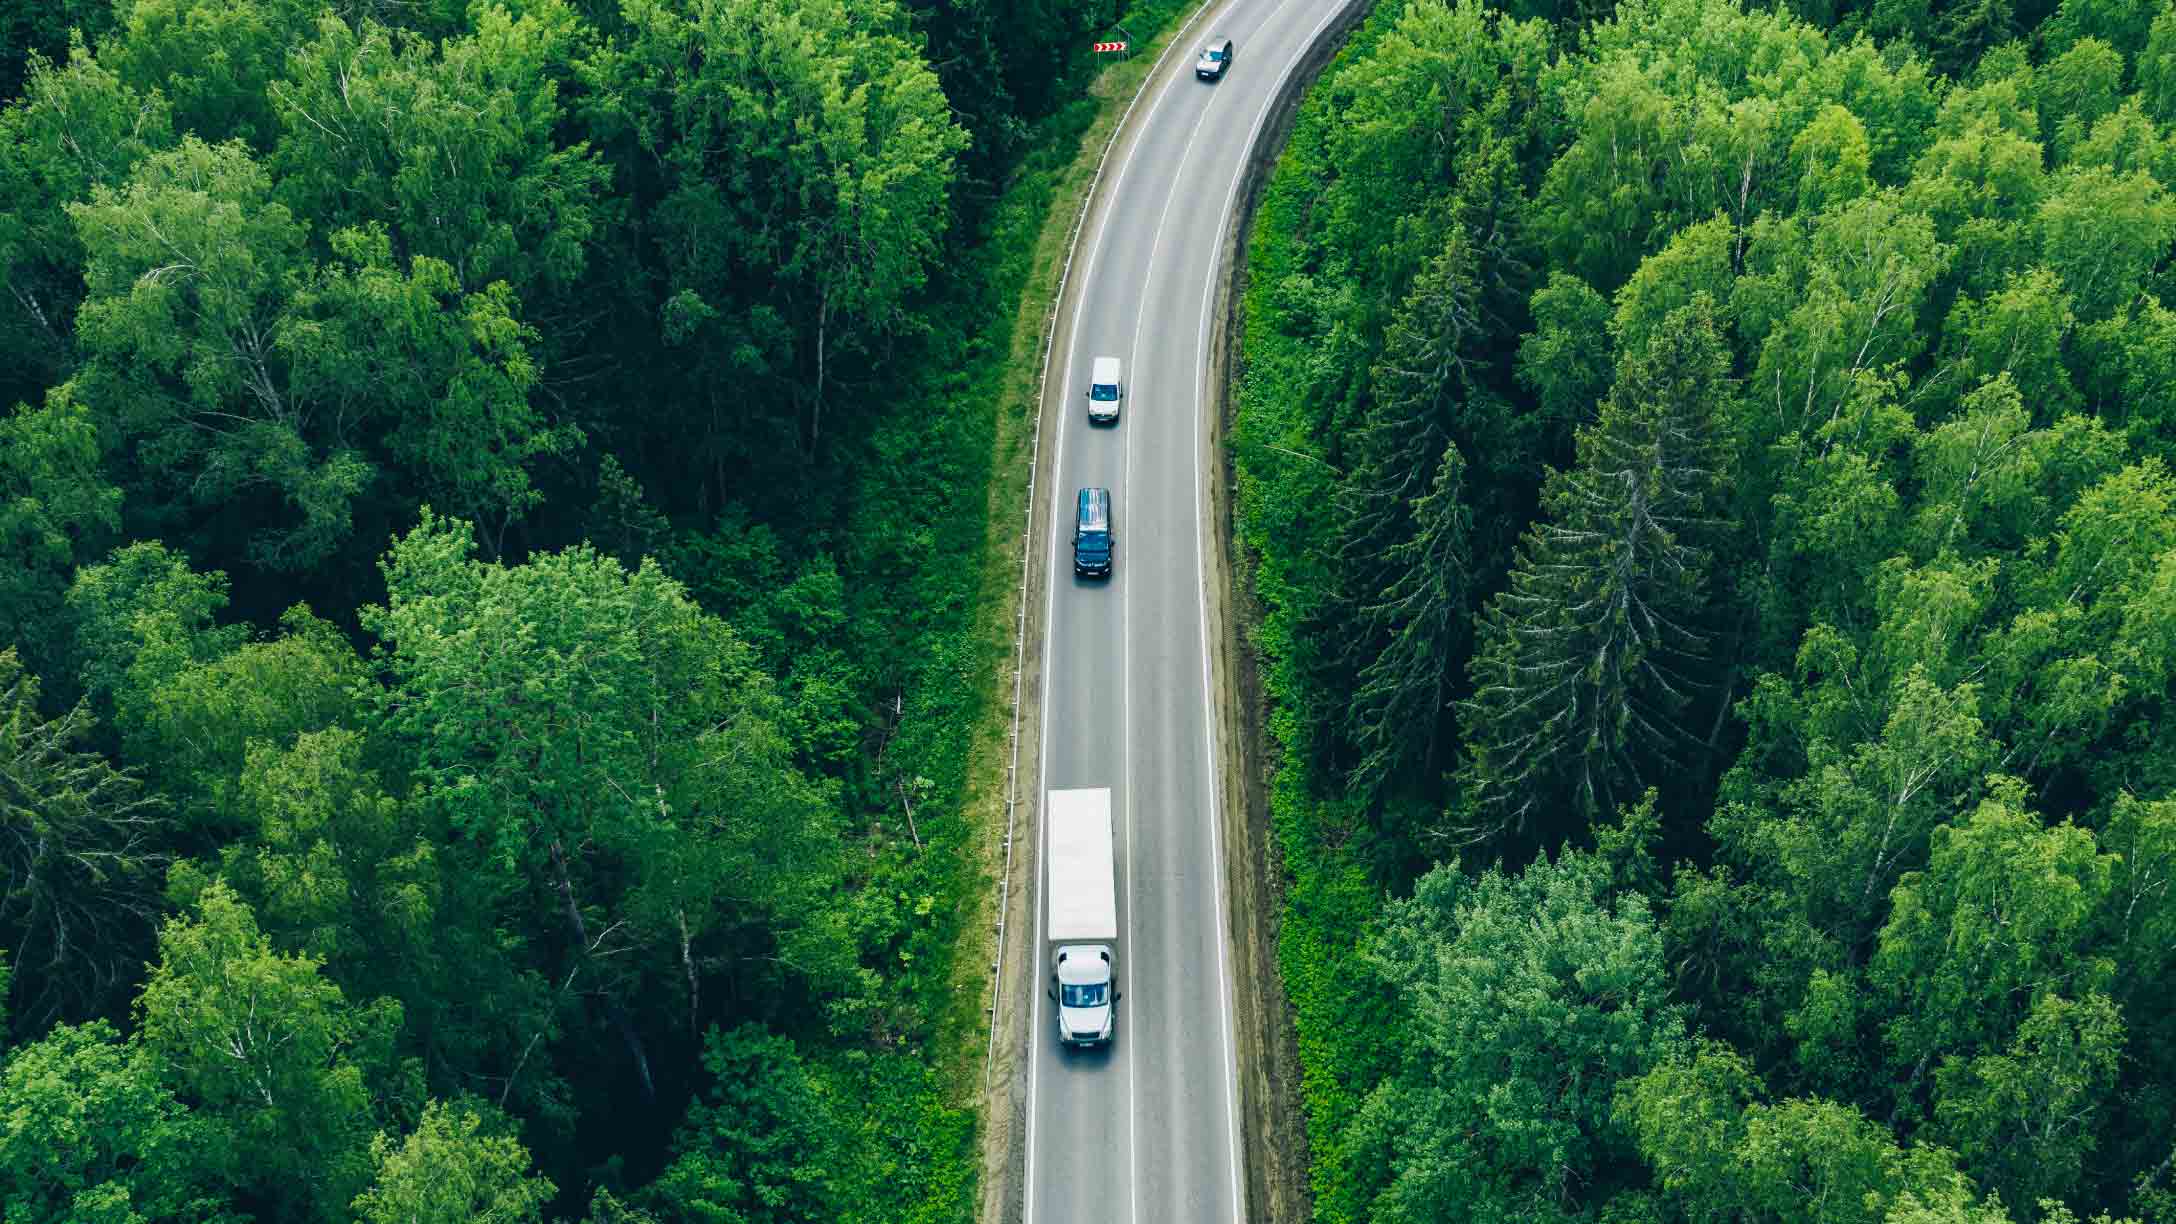 Aerial view of different vehicles driving along a road passing through a forest area